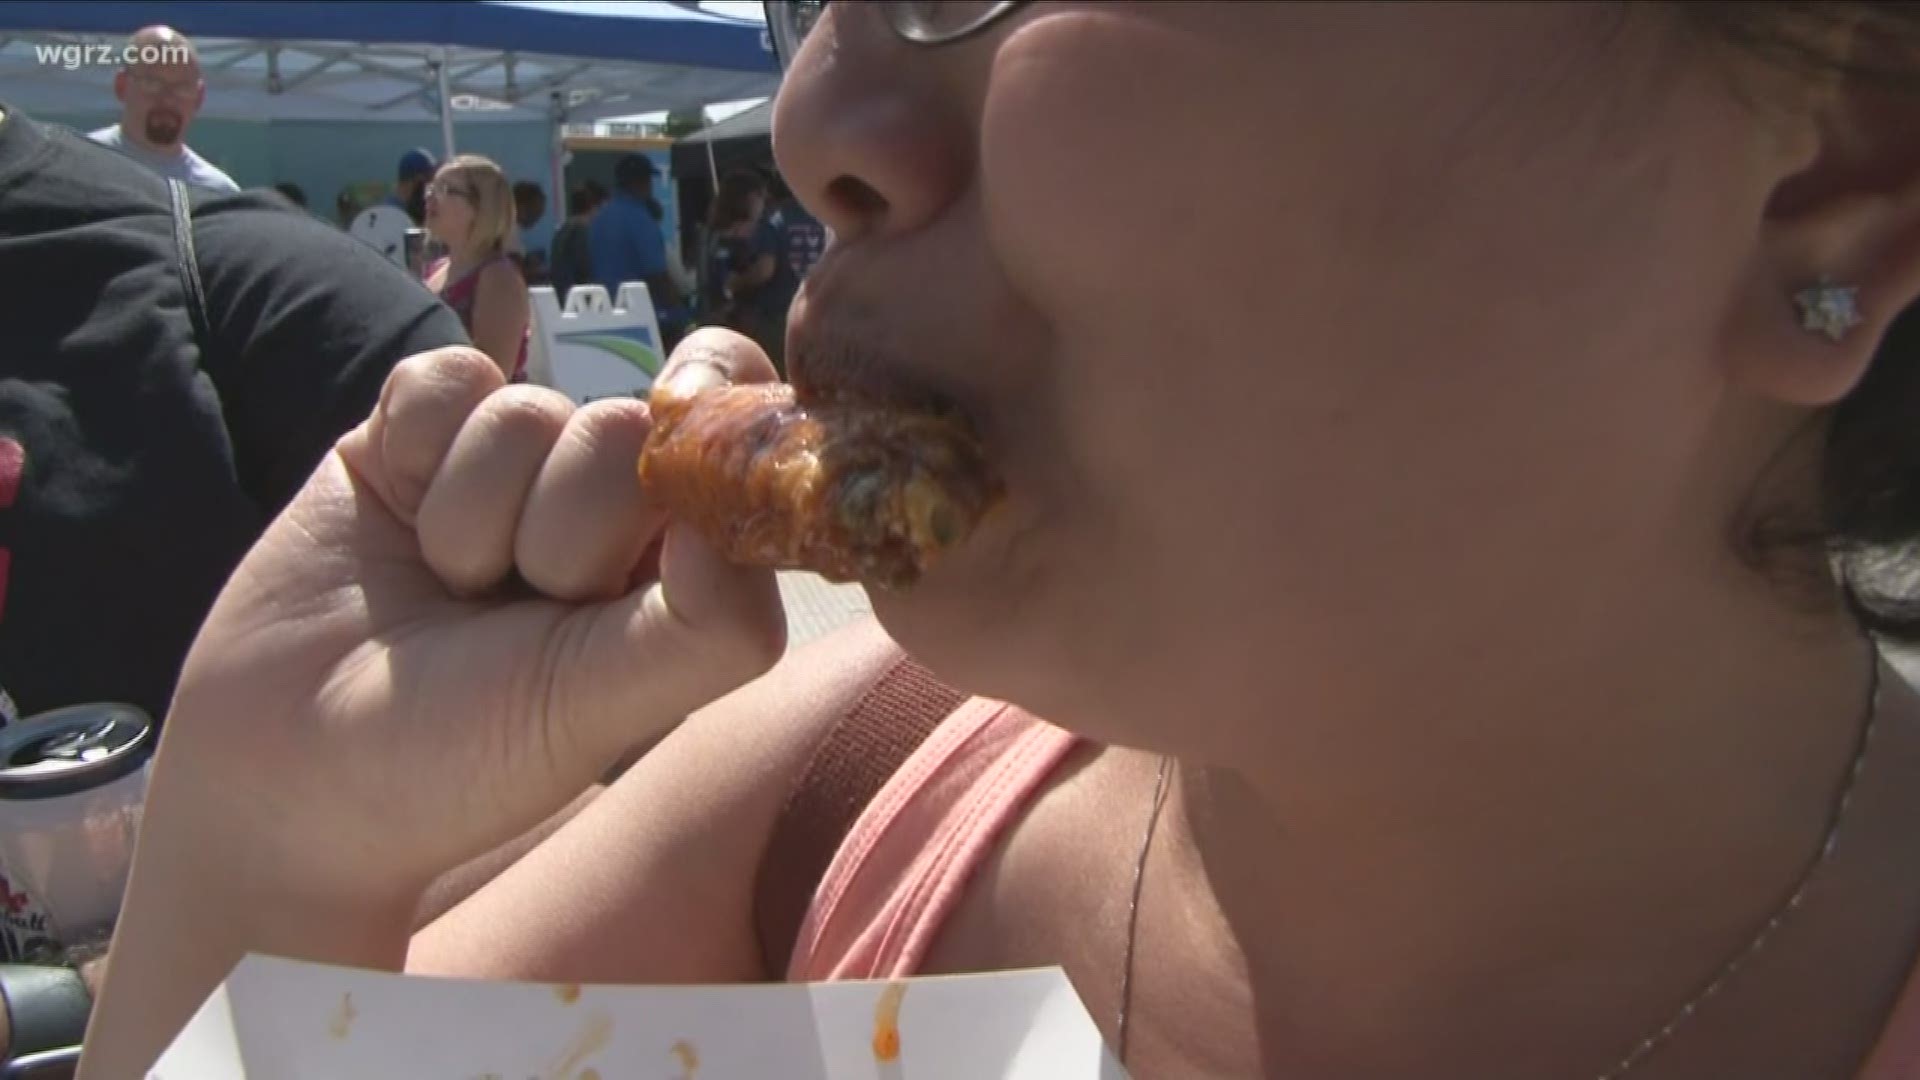 The National Wing Fest kicked off this afternoon at Sahlen Field.